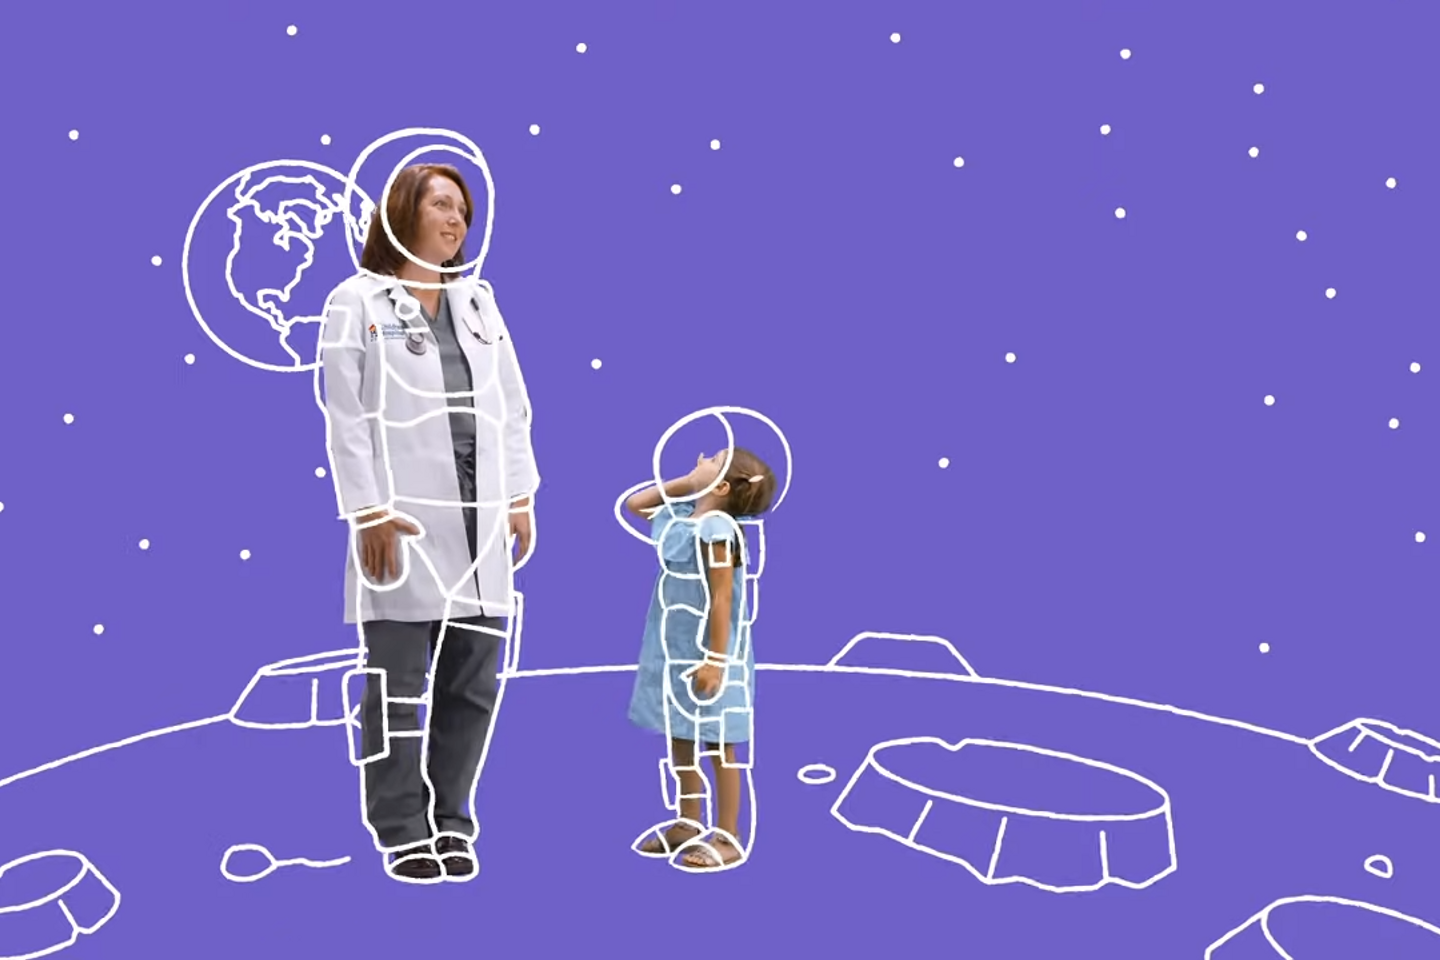 A doctor and a child pretend to be astronauts on the moon.